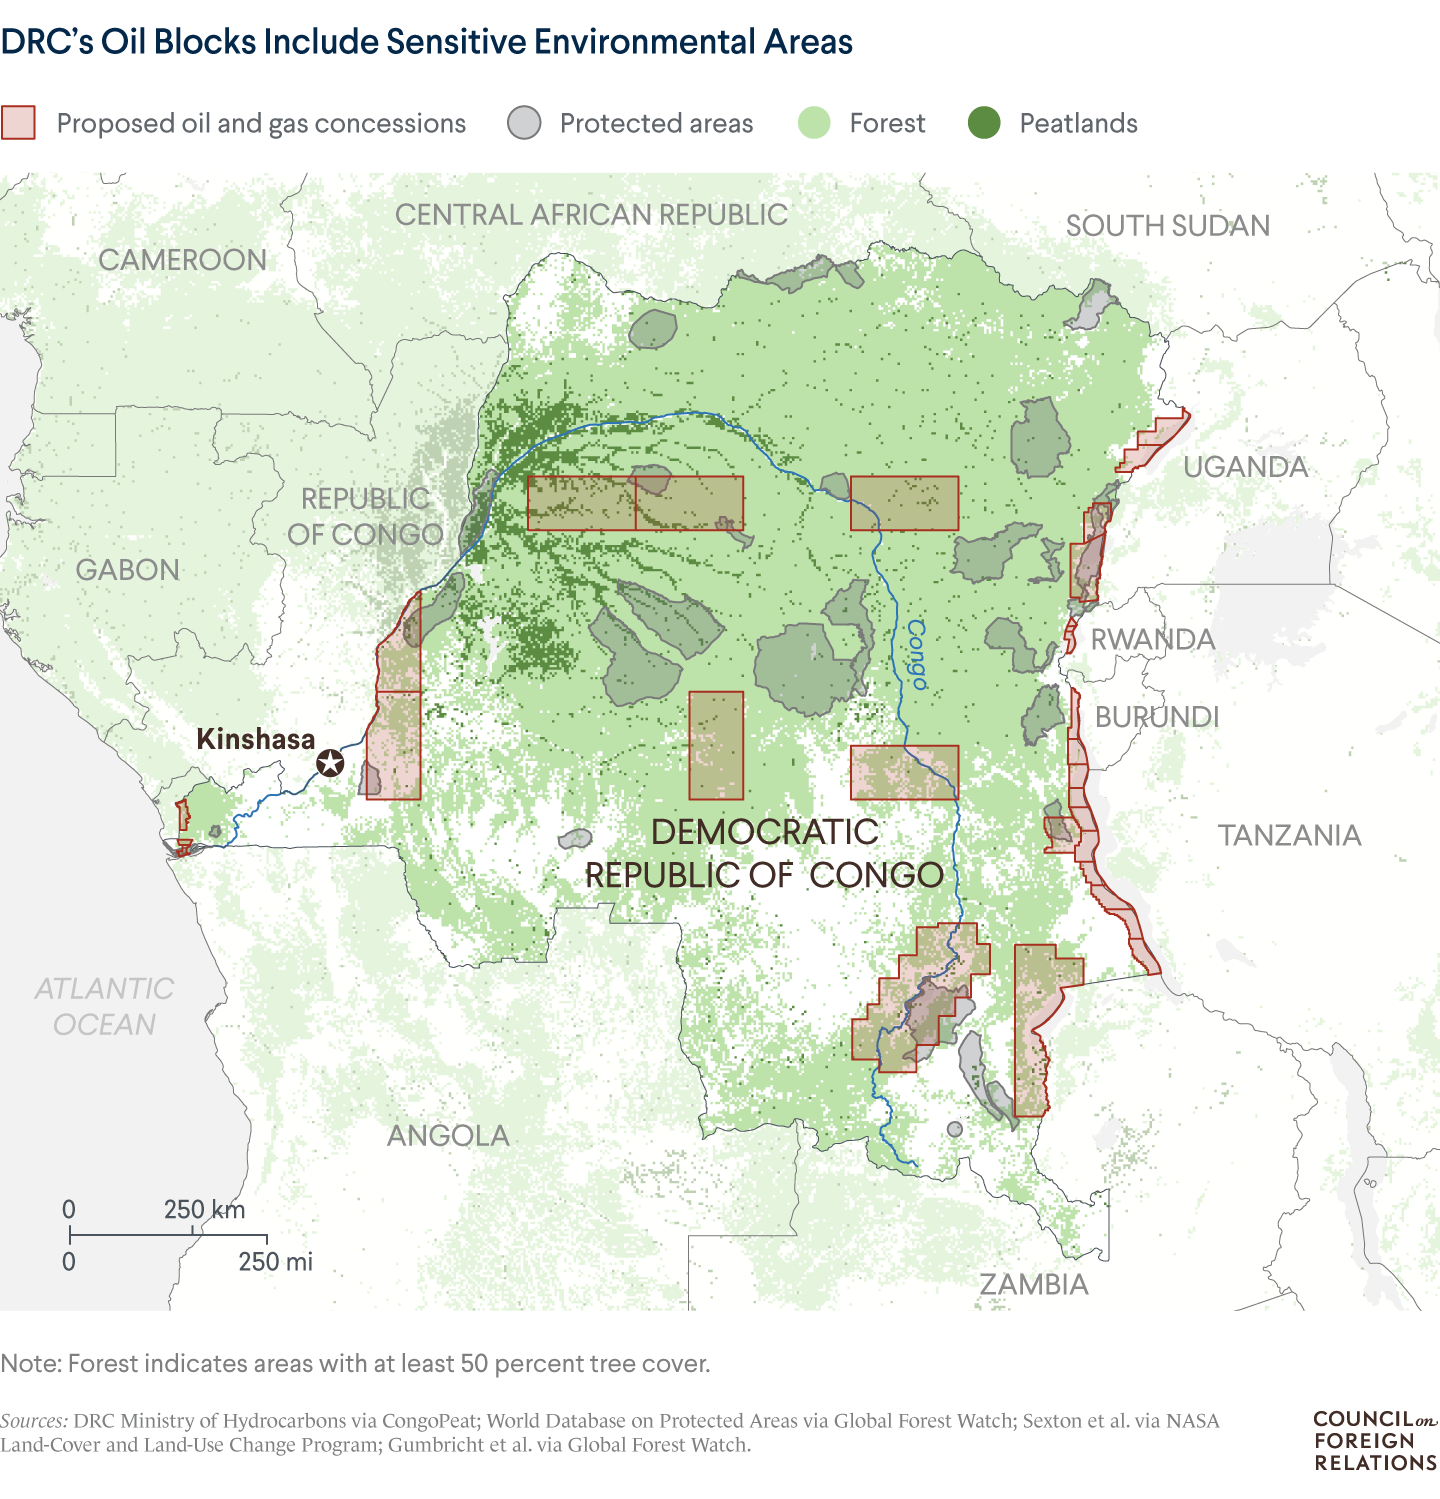 What's Behind the DRC's Decision to Auction Off Some of Its Rain Forest? |  Council on Foreign Relations